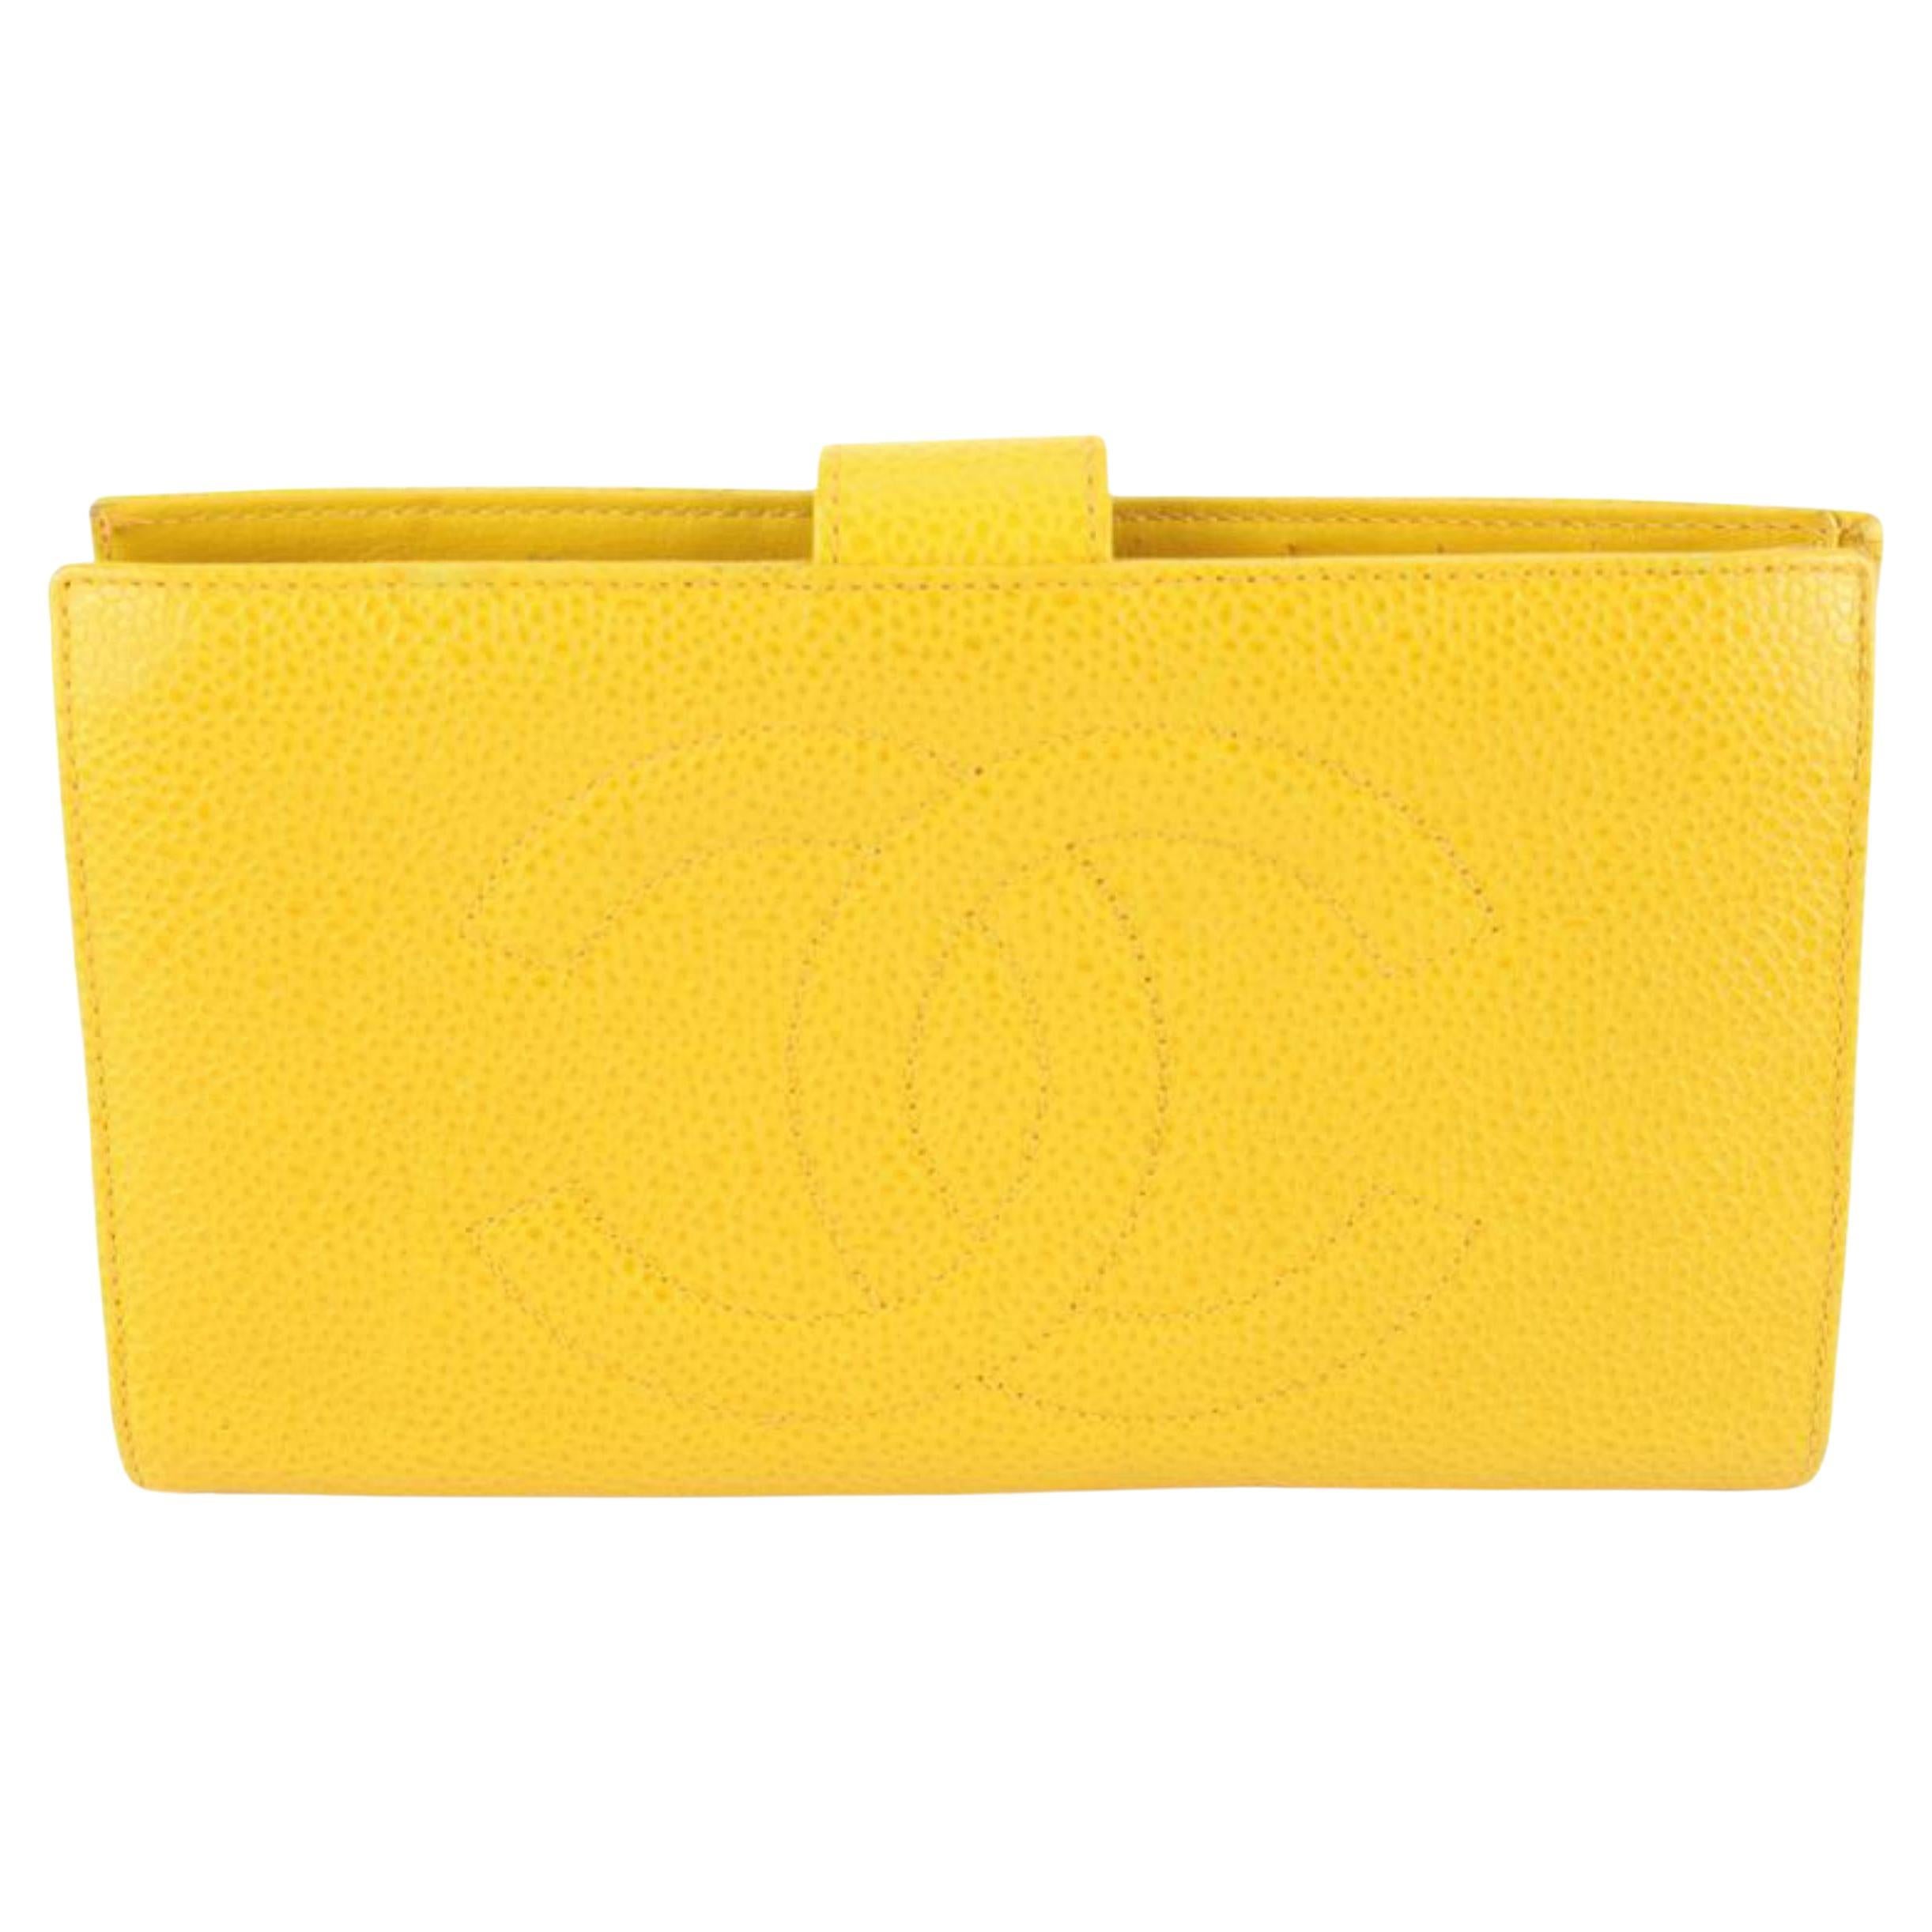 yellow chanel flap wallet